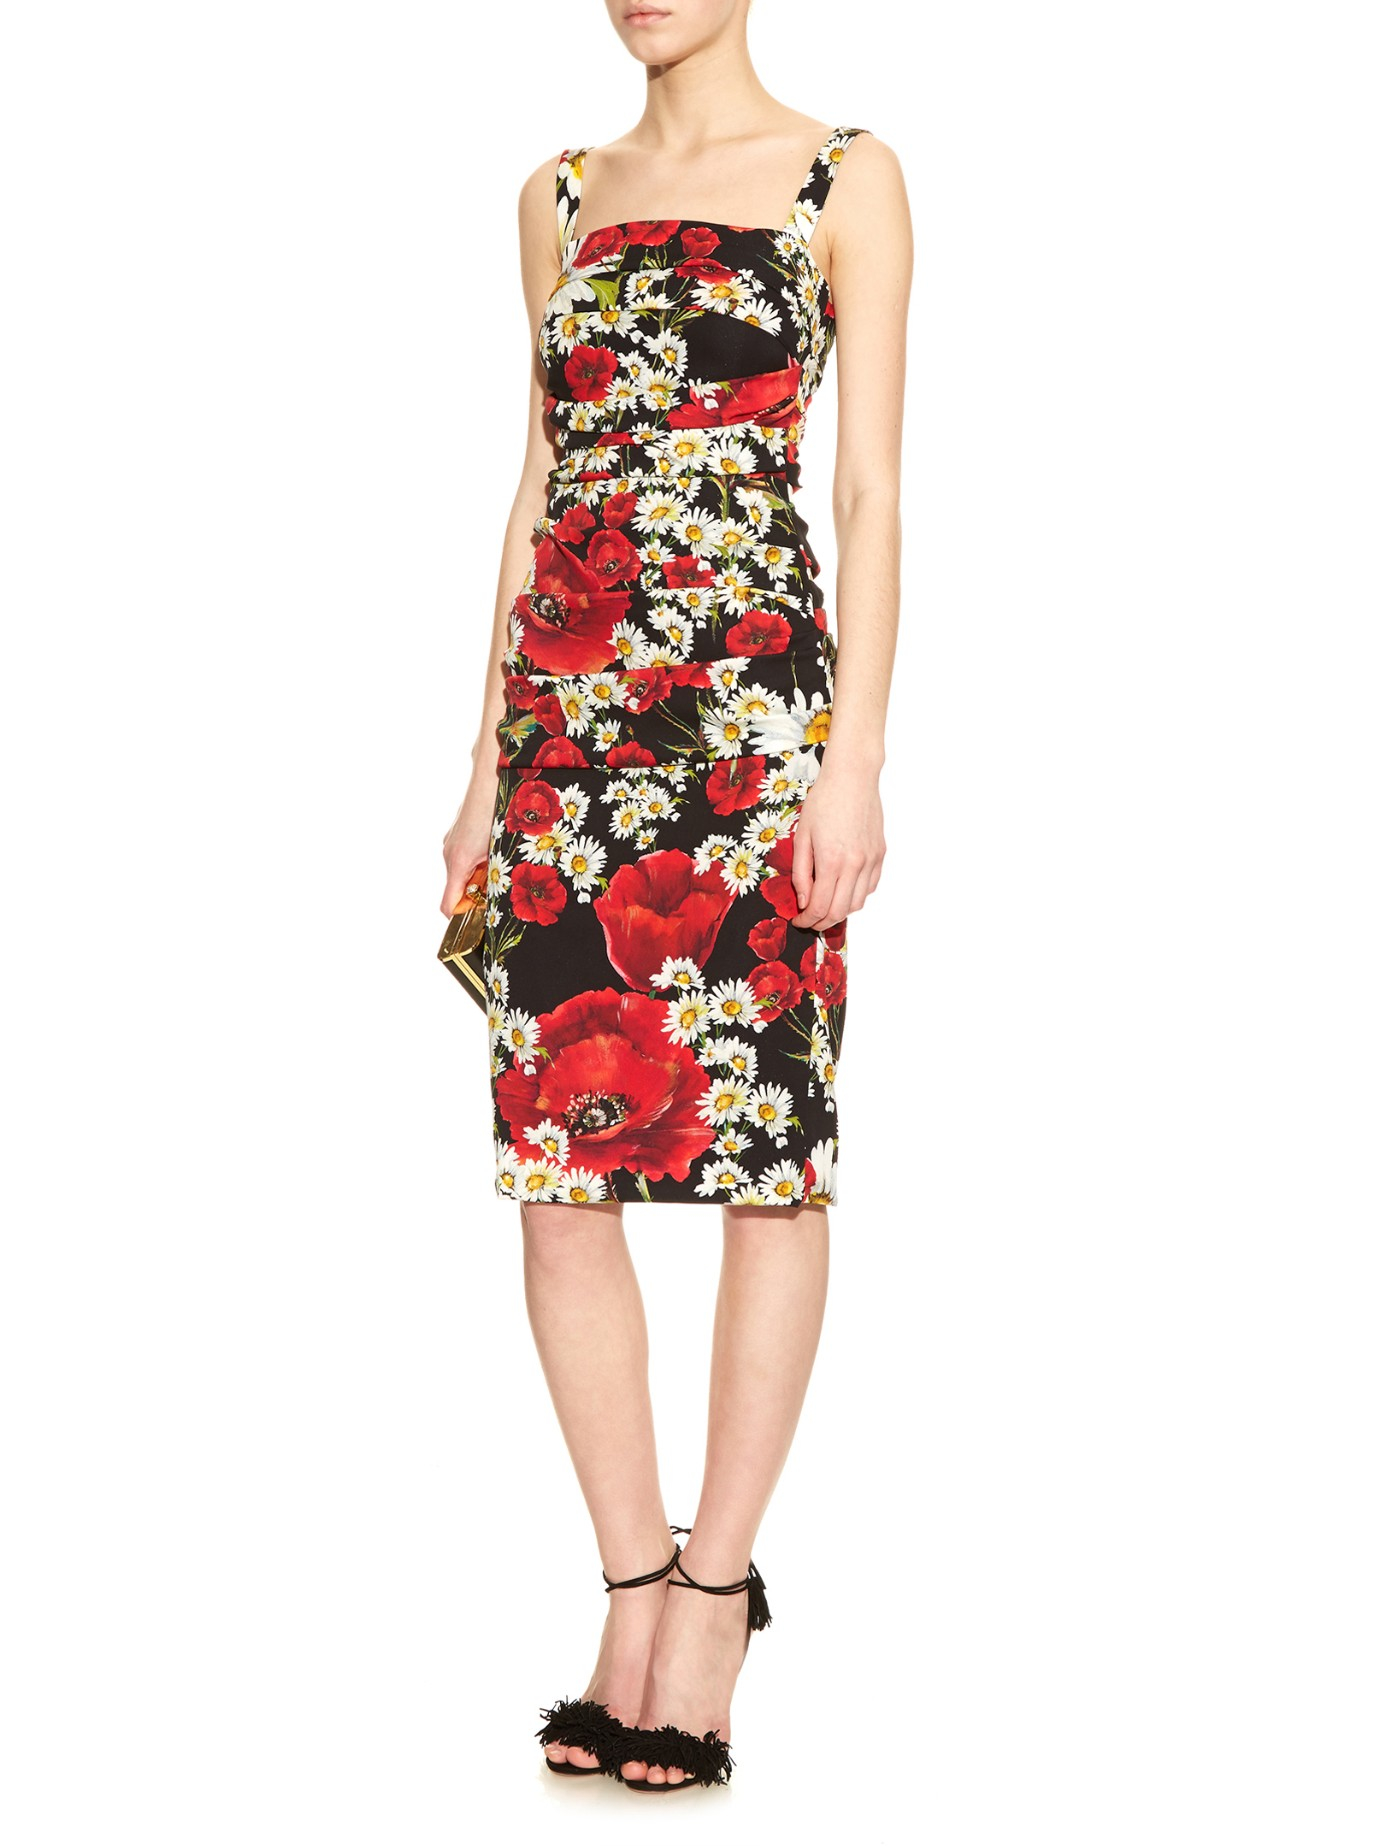 Lyst - Dolce & gabbana Floral-print Ruched Silk Dress in Red